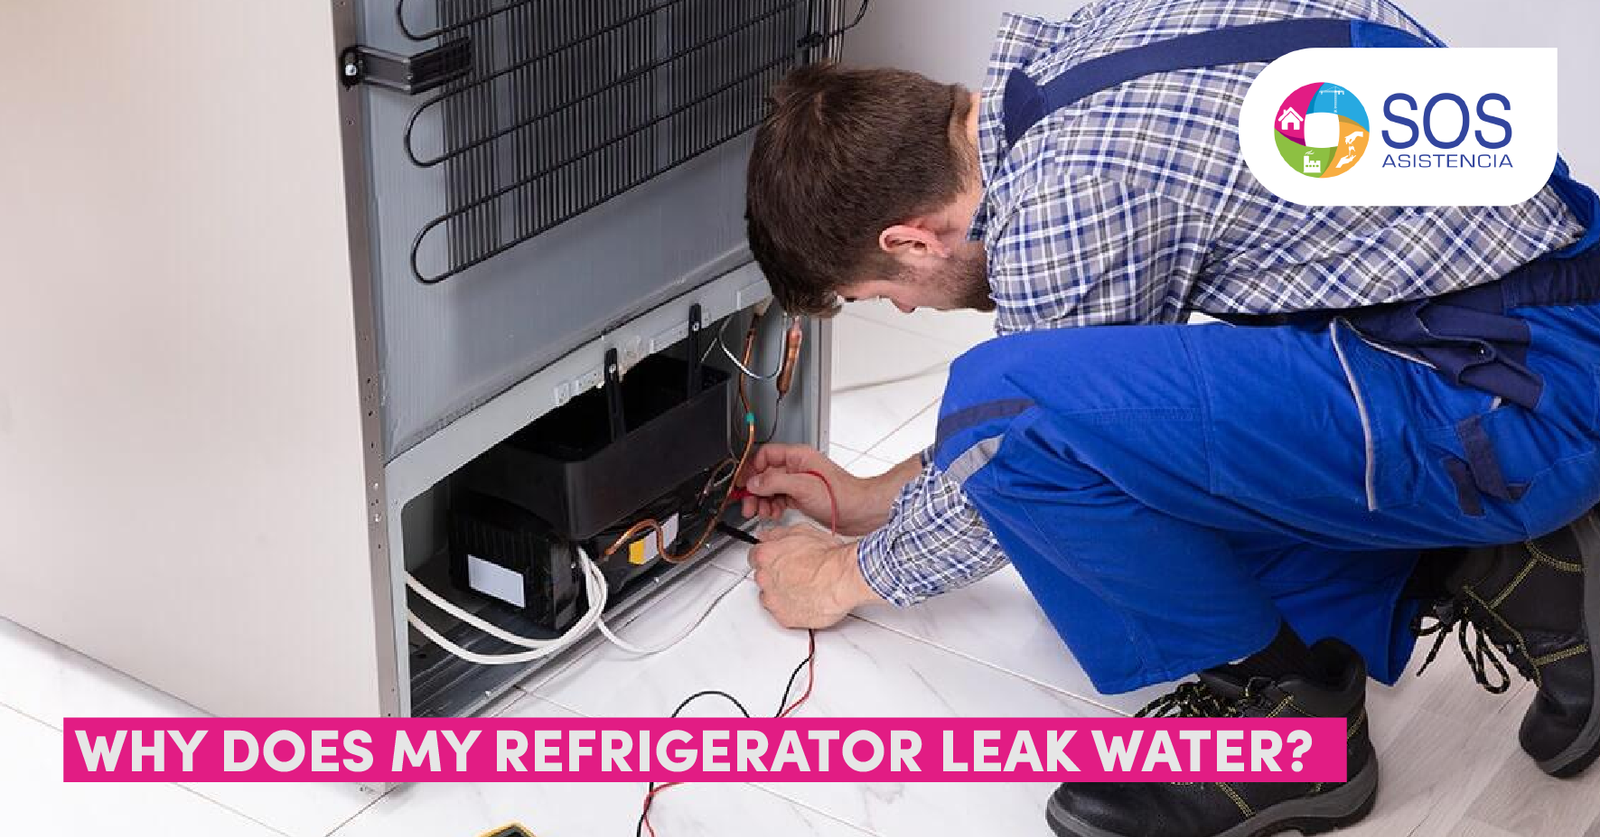 WHY IS MY REFRIGERATOR LEAKING WATER?